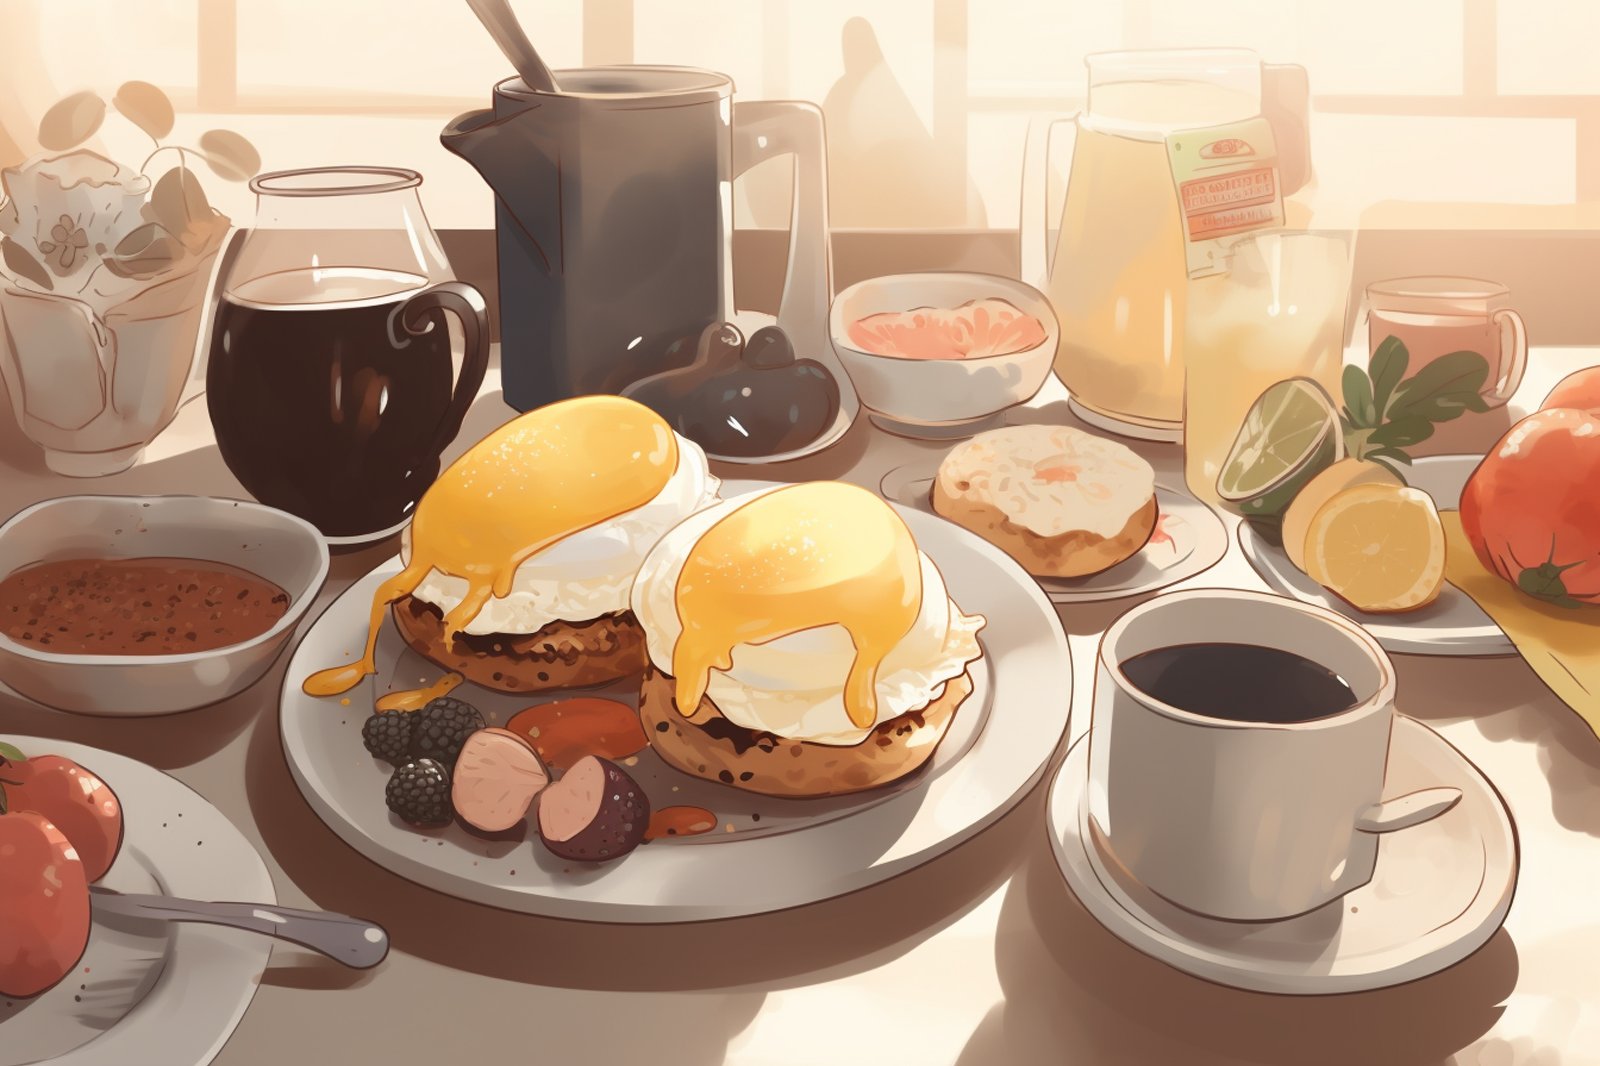 Assorted fruits, egg bread, tea, coffee, drinks, and berries on a table